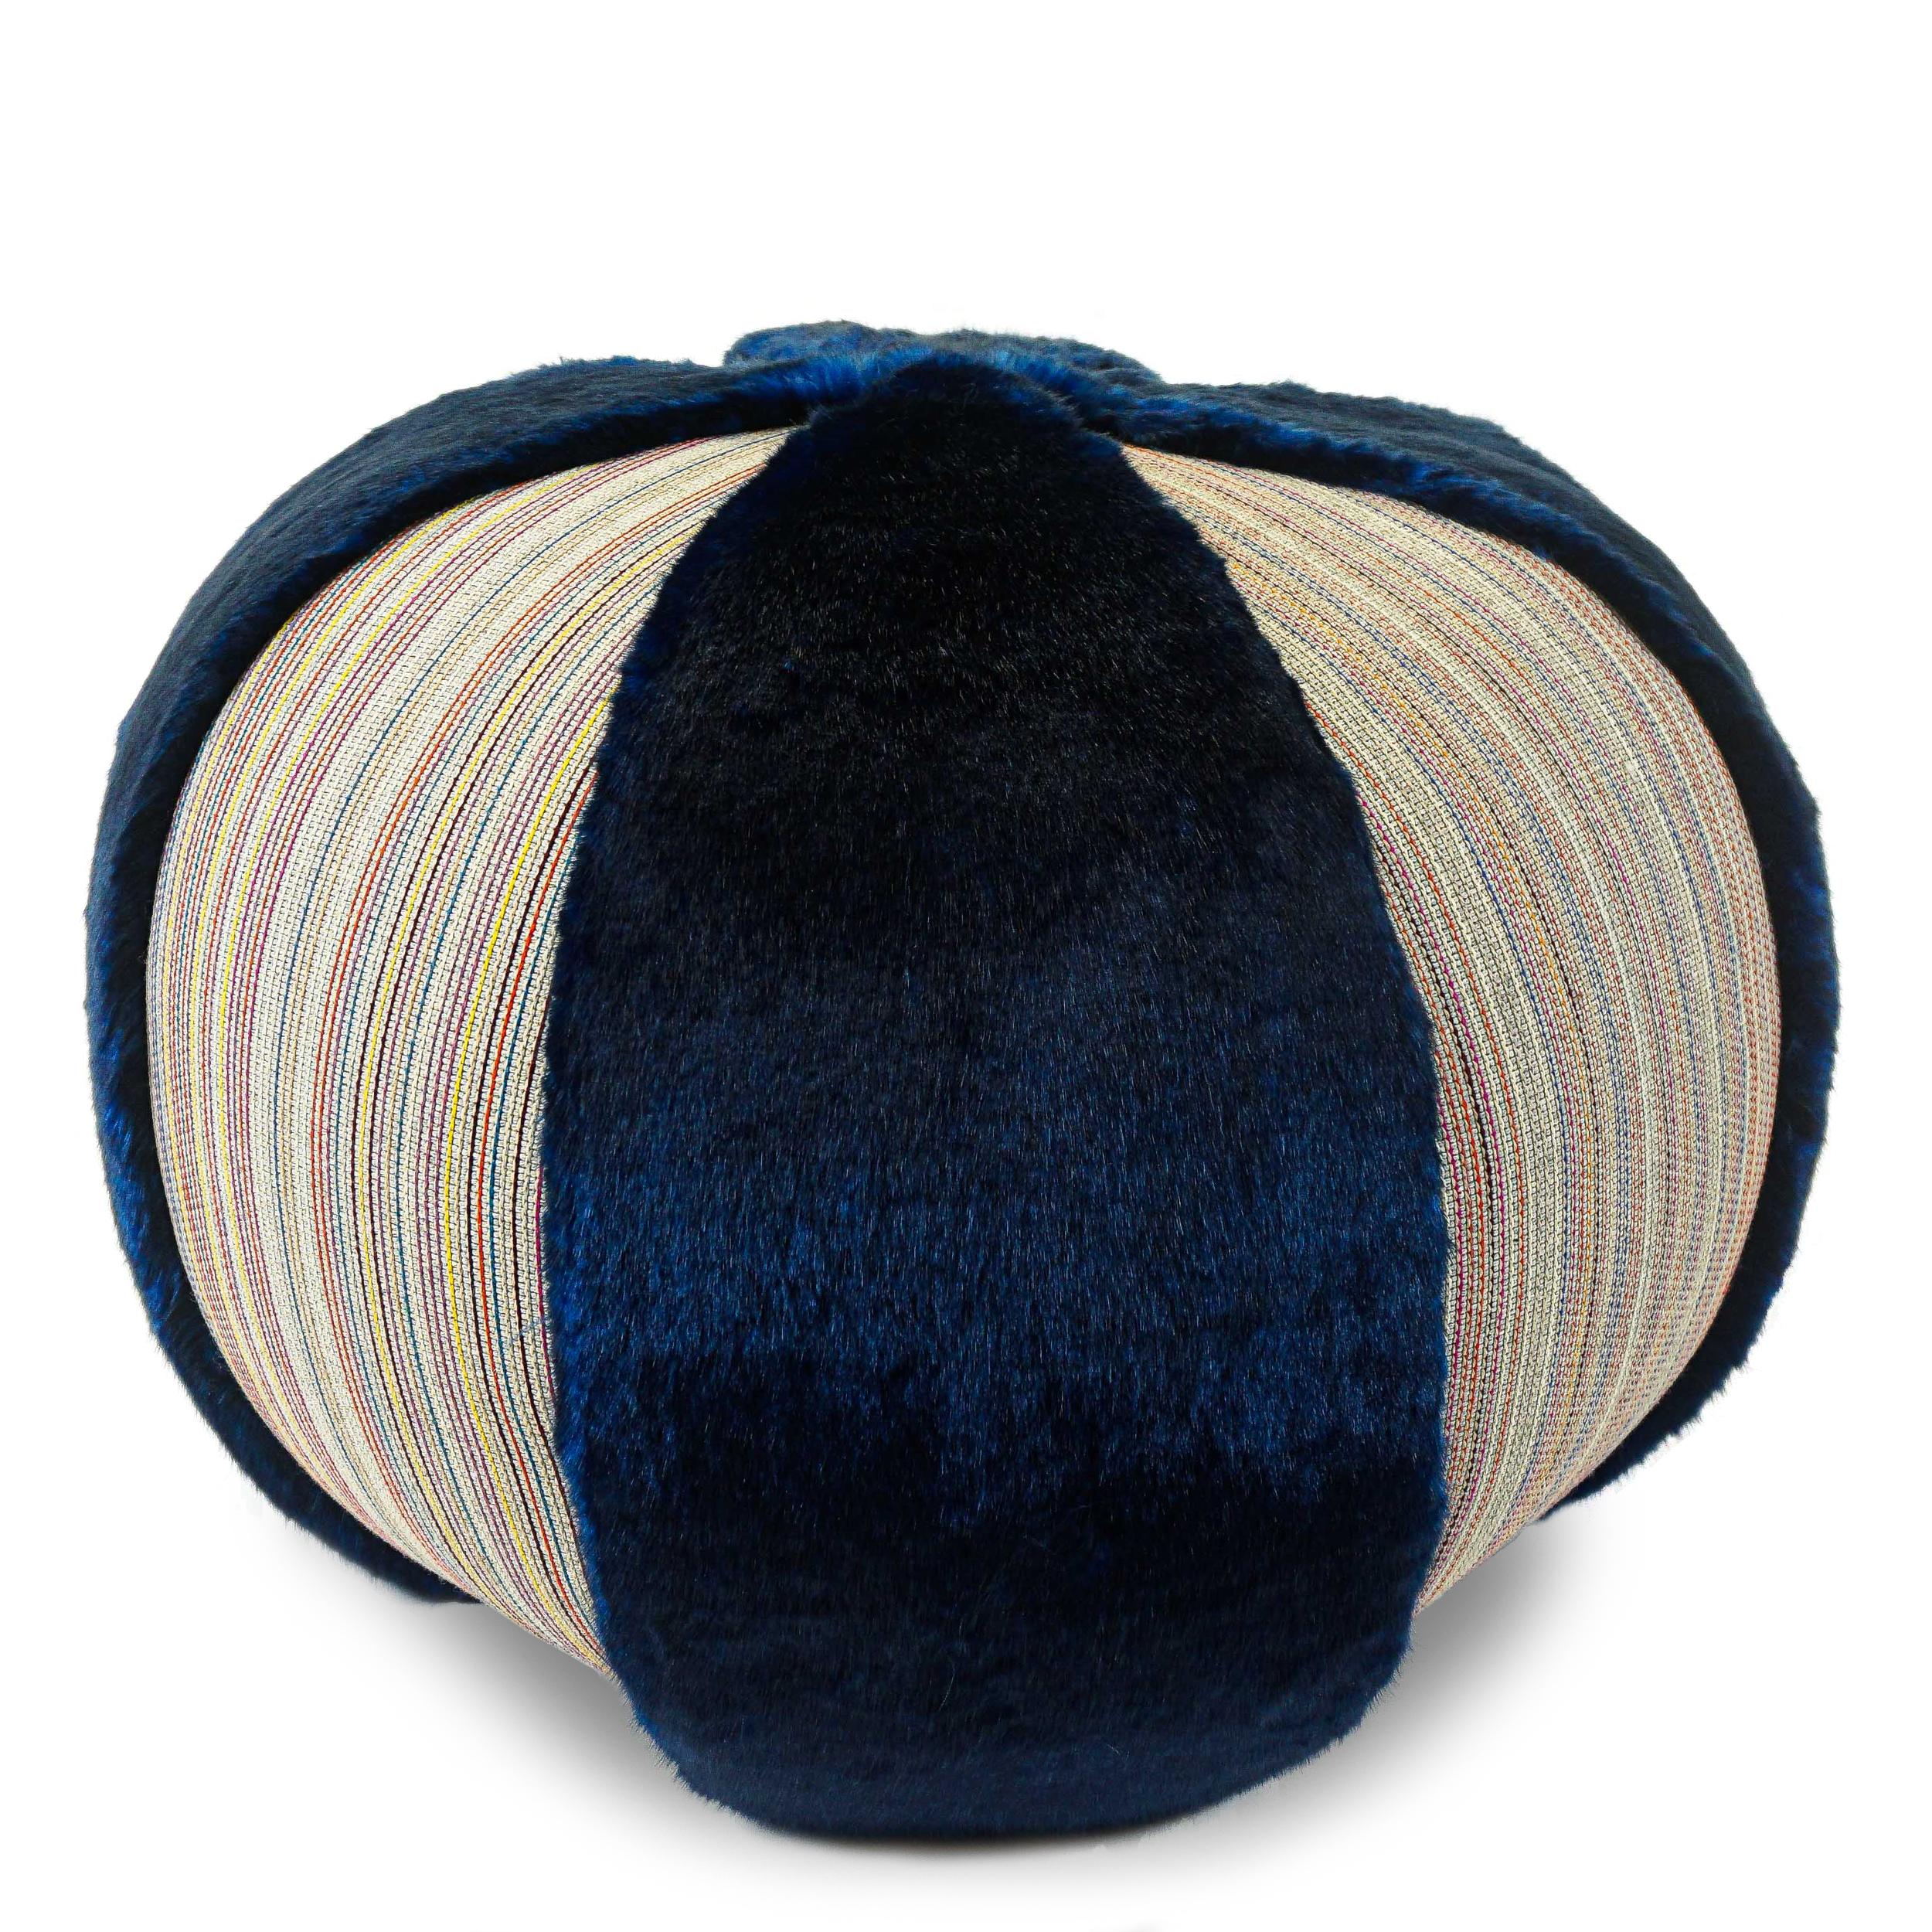 Handmade pouf/ottoman covered in vibrant blue faux fur & colorful textured stripe fabric. Light-weight enough to move around as occasional seating without scratching floor, but substantial and firm enough to support a serving tray or adult size